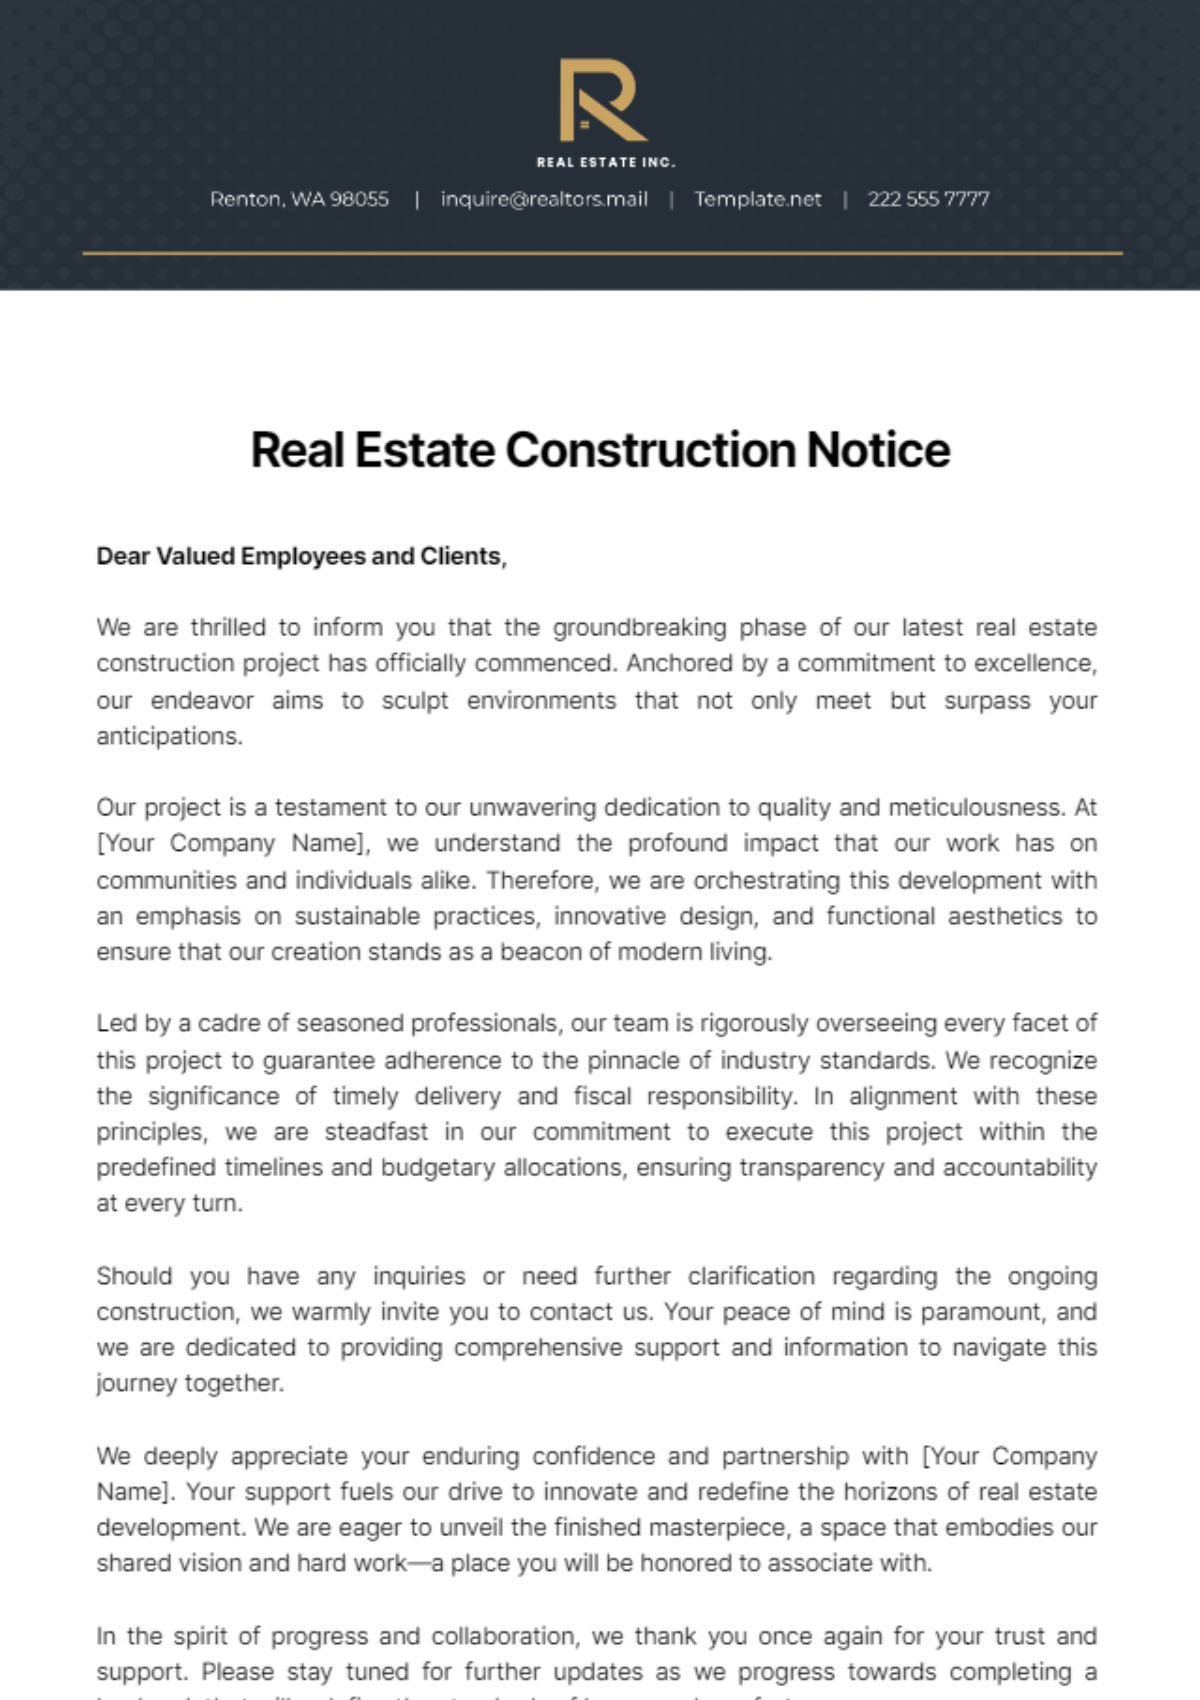 Real Estate Construction Notice Template